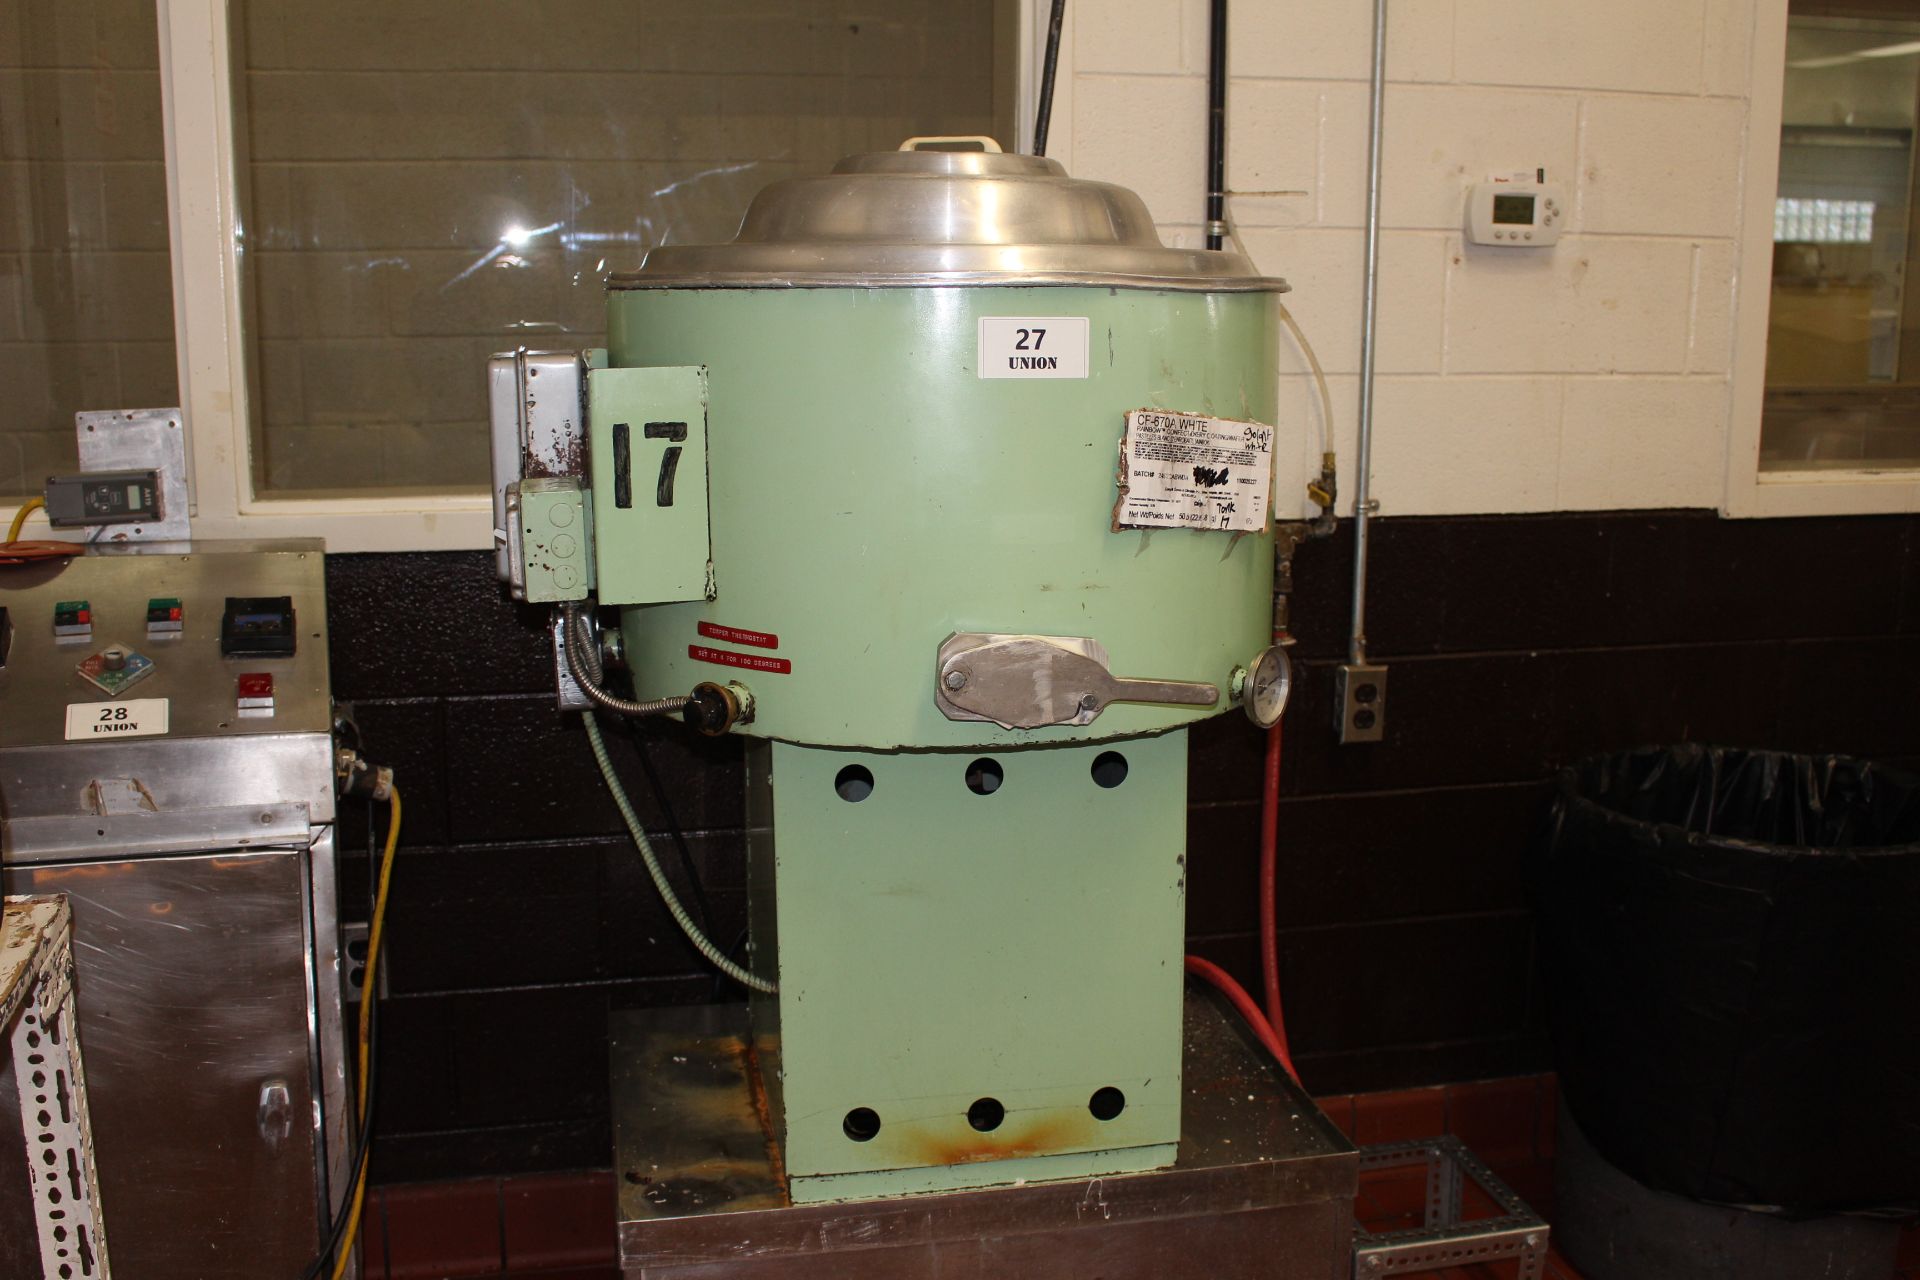 Asset 27 - Elsighorst 250 lb Chocolate Melter, water jacketed and agitated tanks with electric